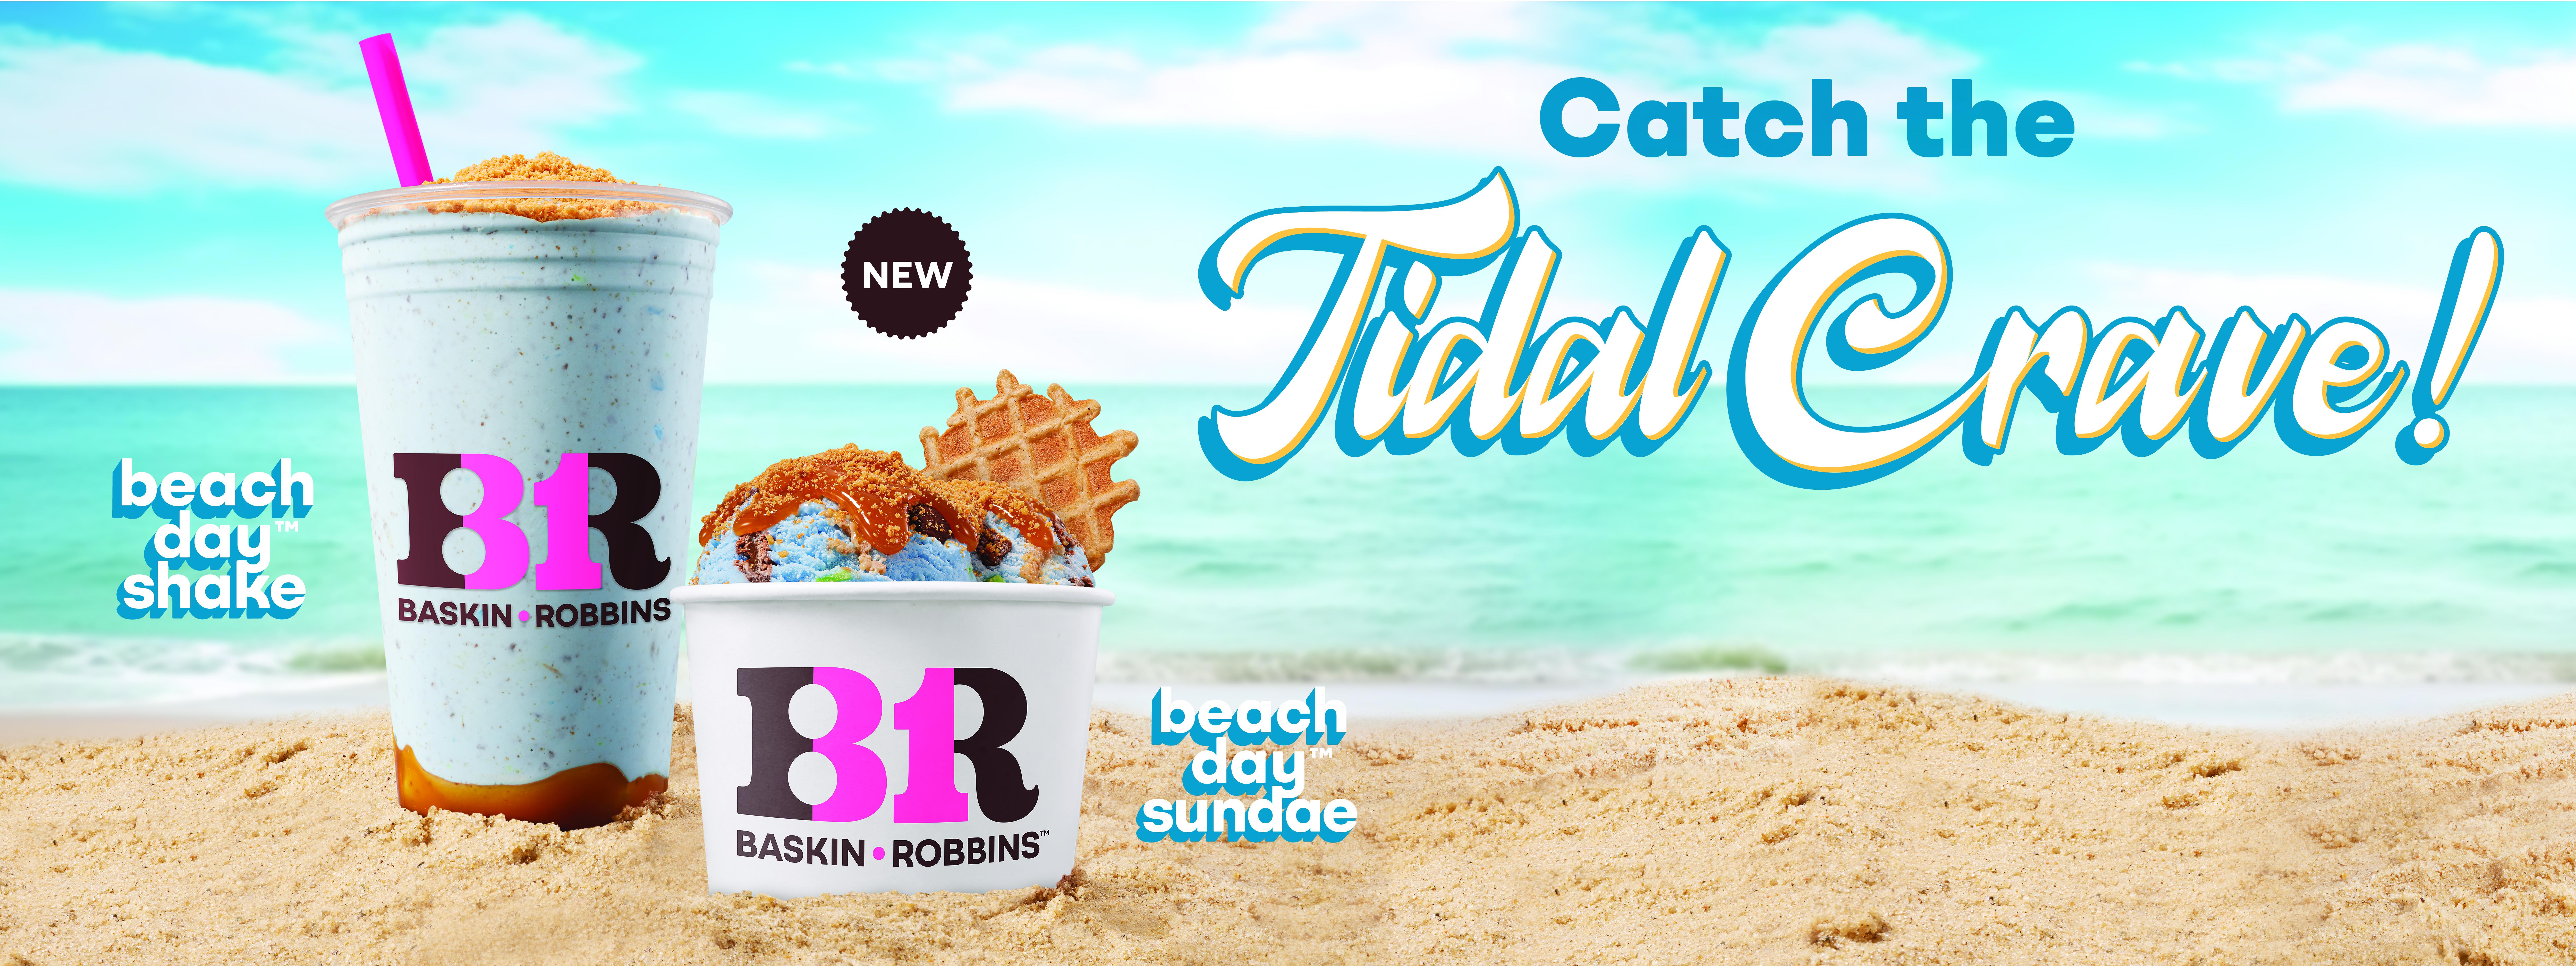 Catch the Tidal Crave